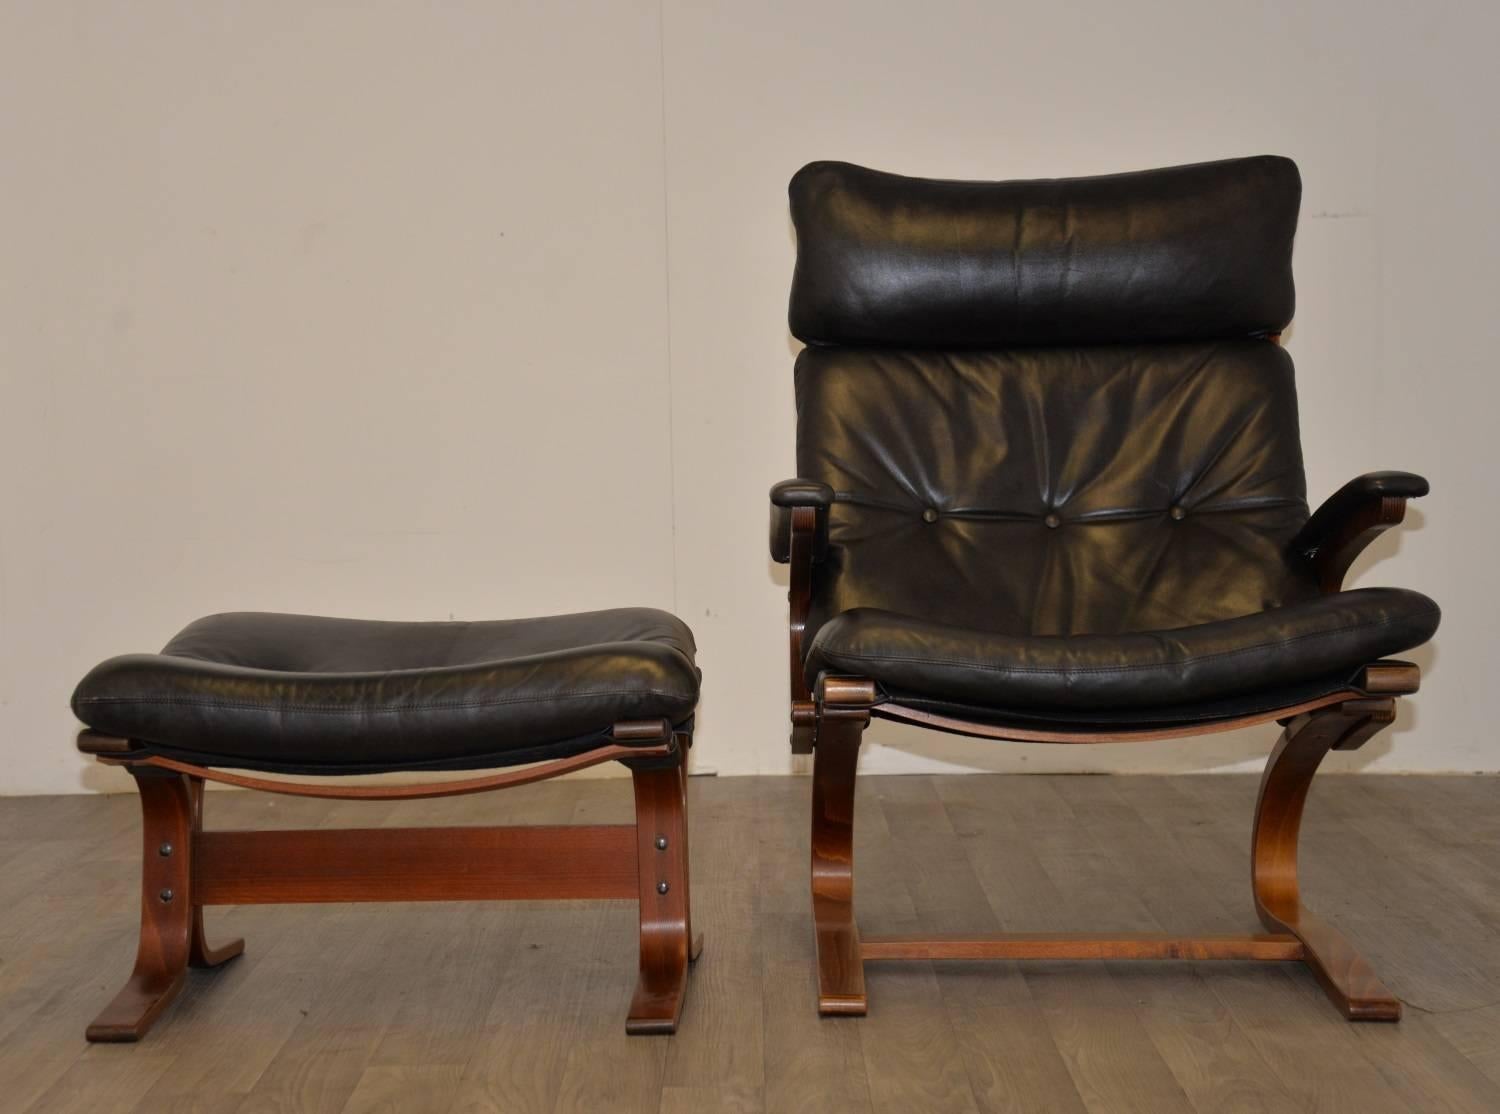 Discounted airfreight for our US and International customers (2 weeks door to door)

Vintage leather armchair in stunning black leather built by Sormani of Italy in 1963. Standing on a rosewood wooden frame and upholstered in stunning soft back